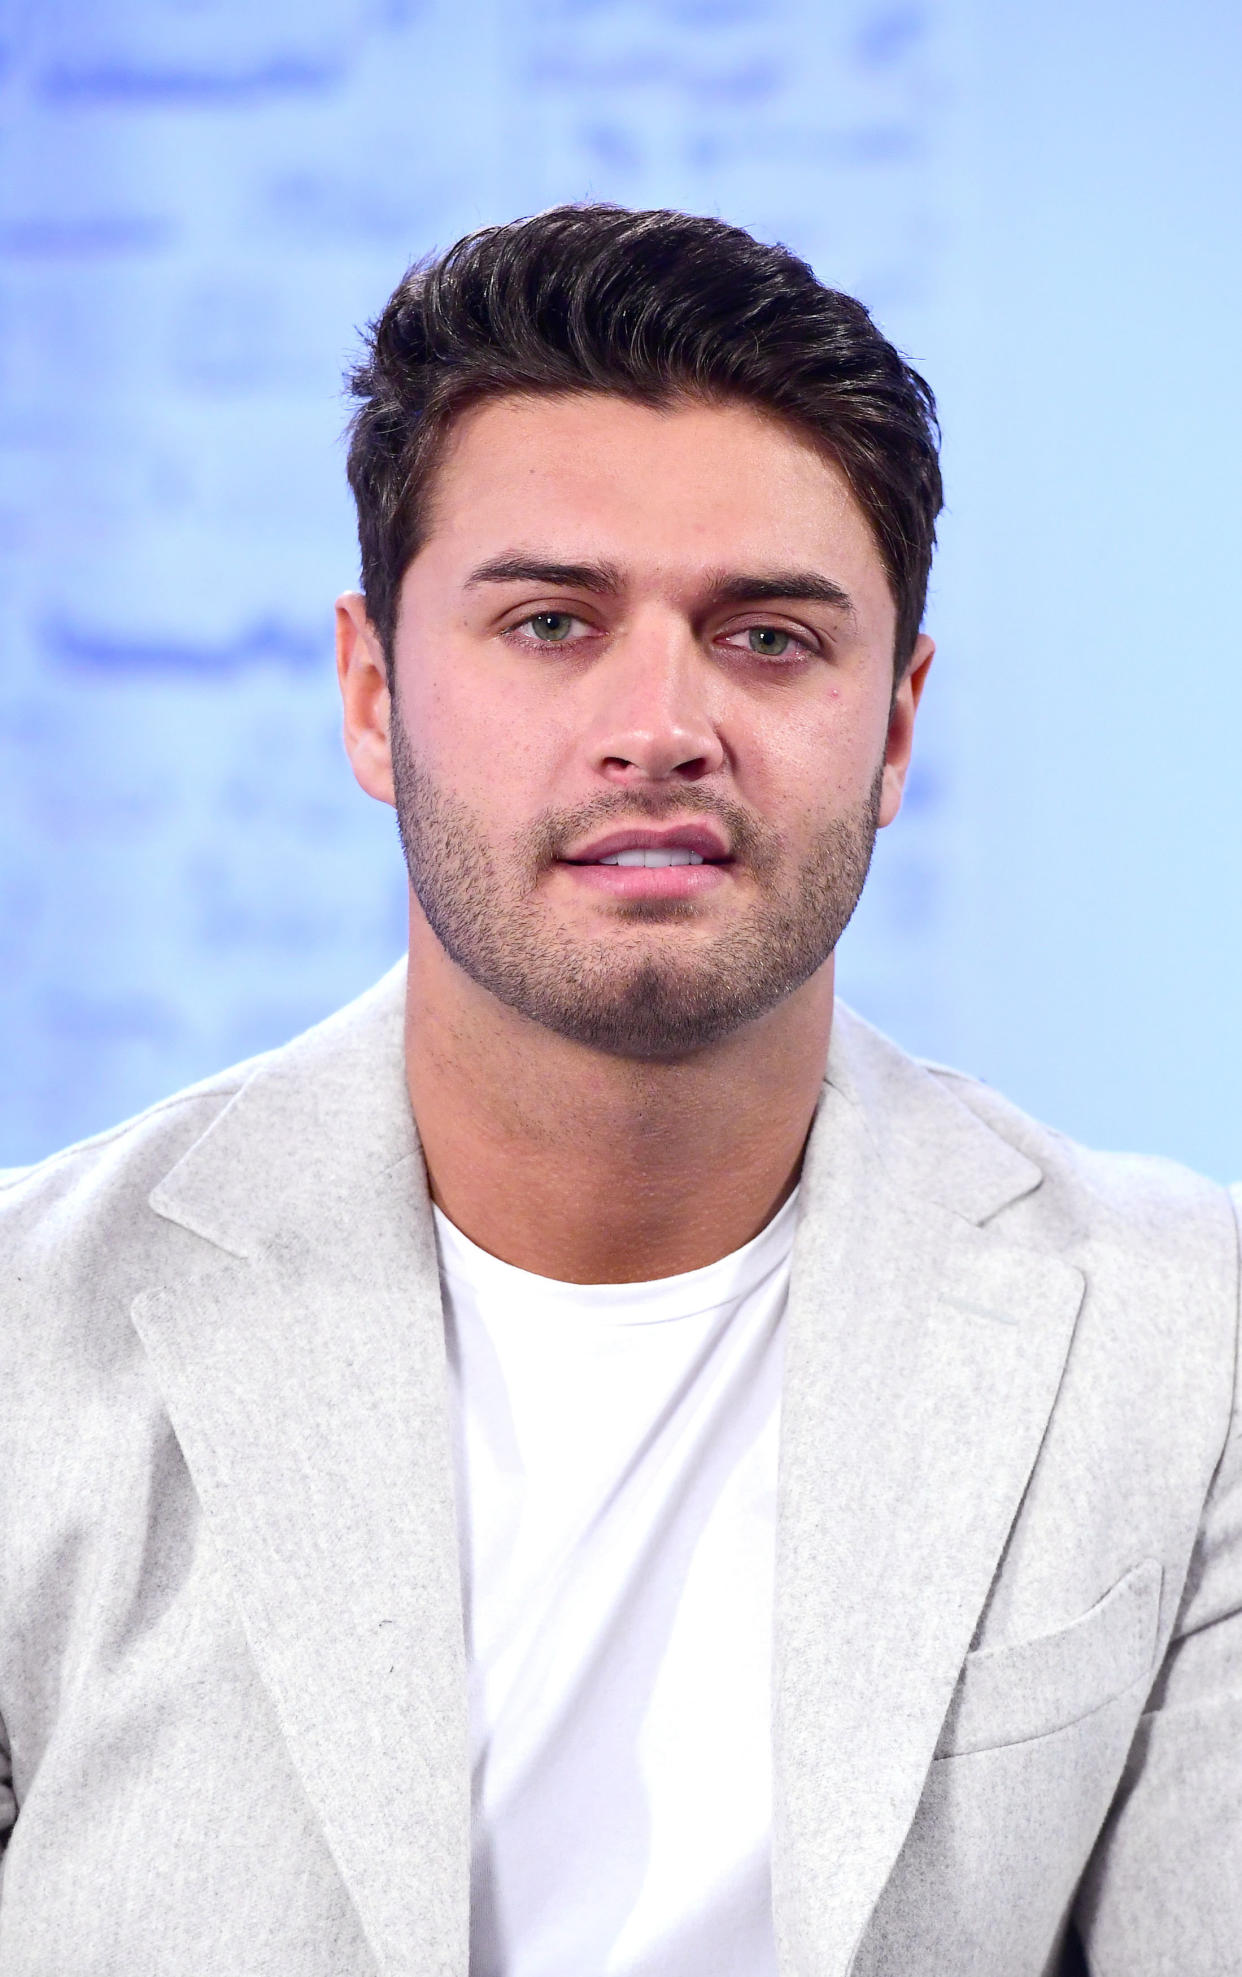 File photo dated 7/2/2018 of former Love Island contestant Mike Thalassitis who died aged 26